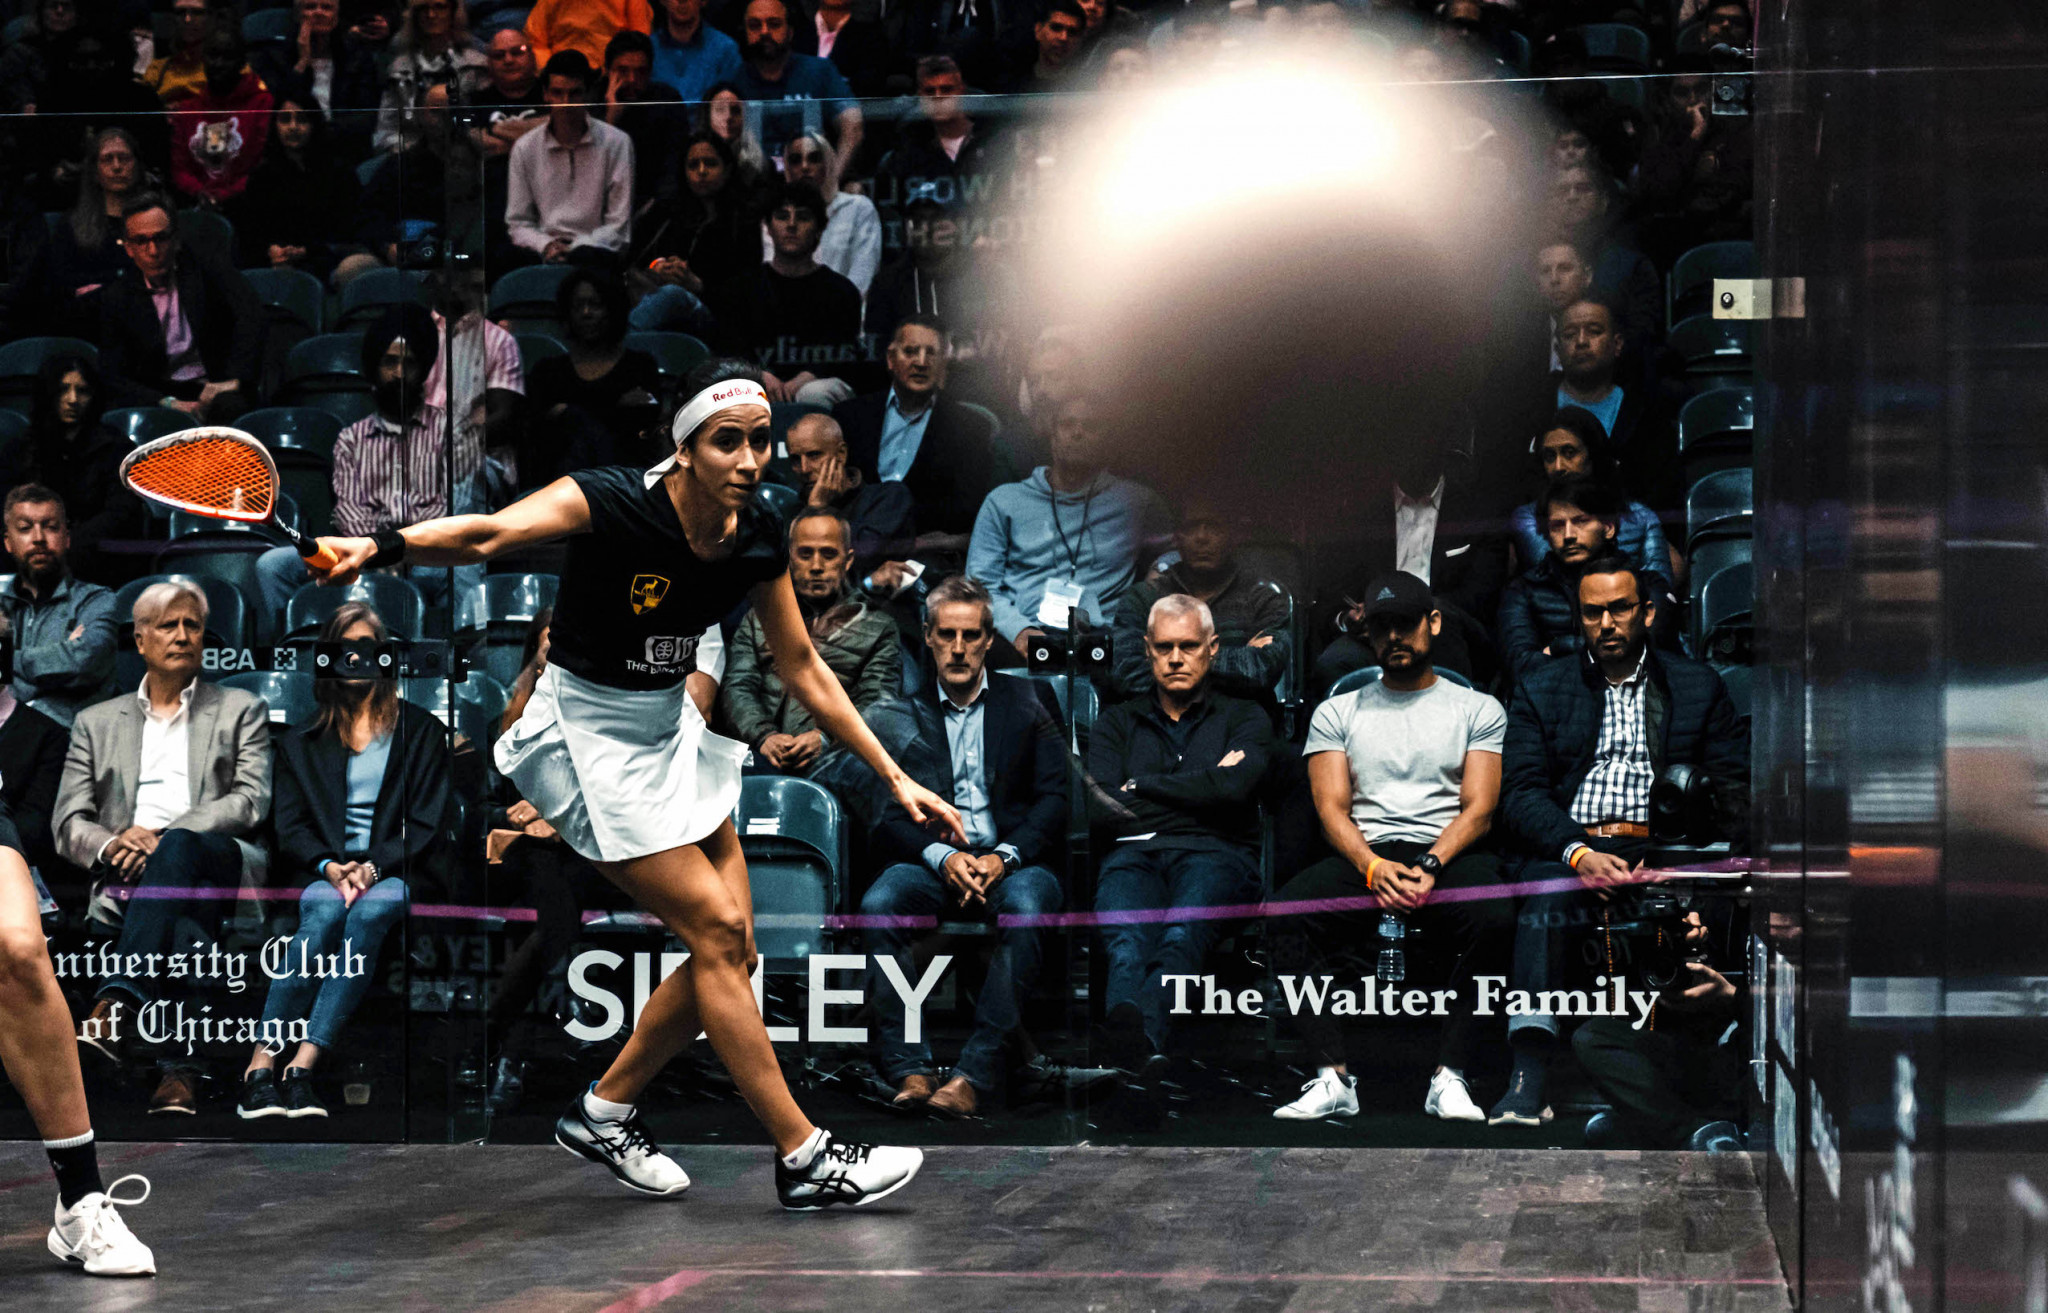 Egypt's players impress in quest for PSA World Championships glory